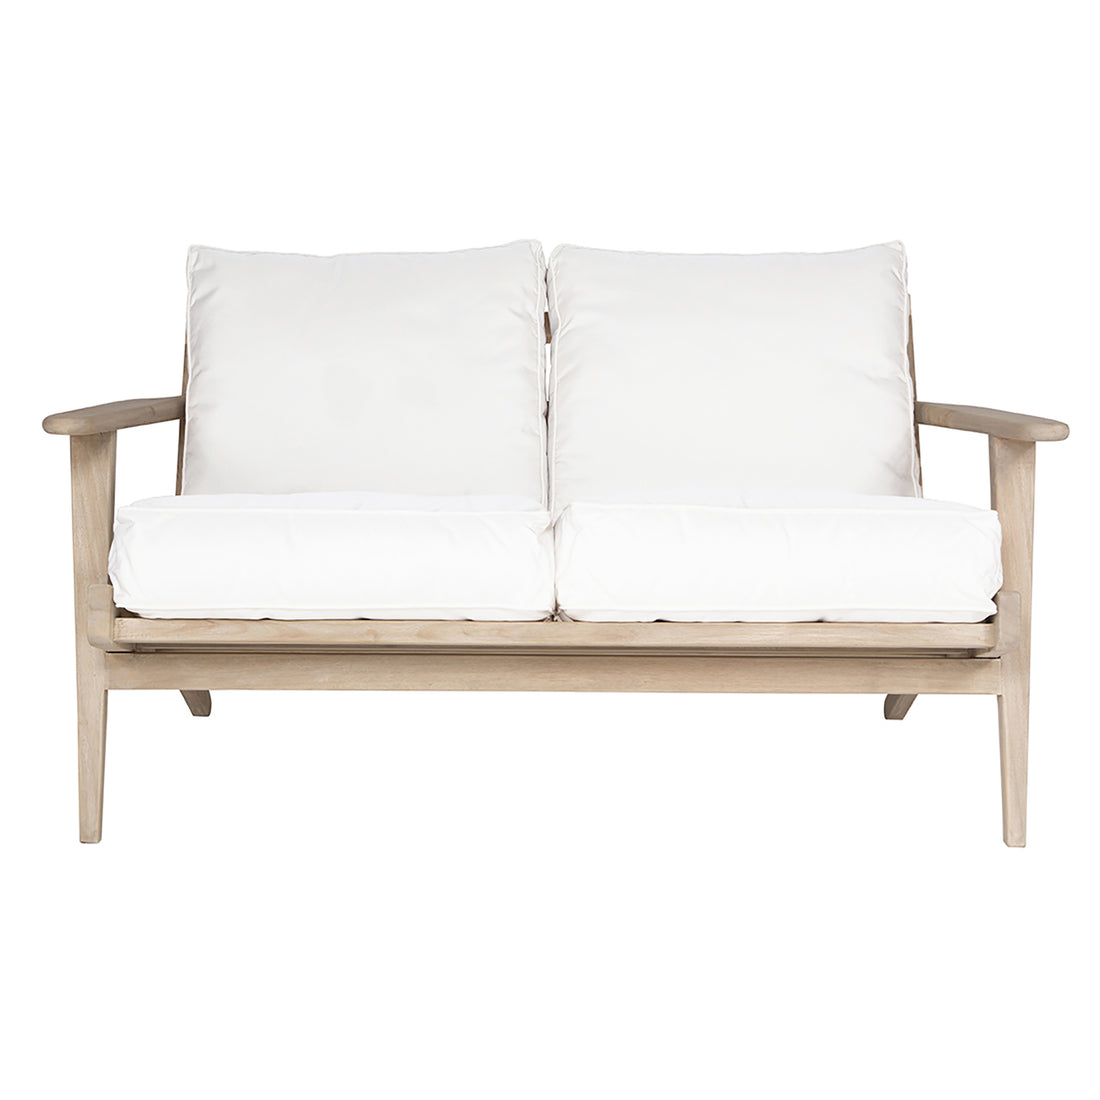 Camps Bay Sofa | Two Seater - Uniqwa Collections wholesale furniture suppliers for interior designers australia